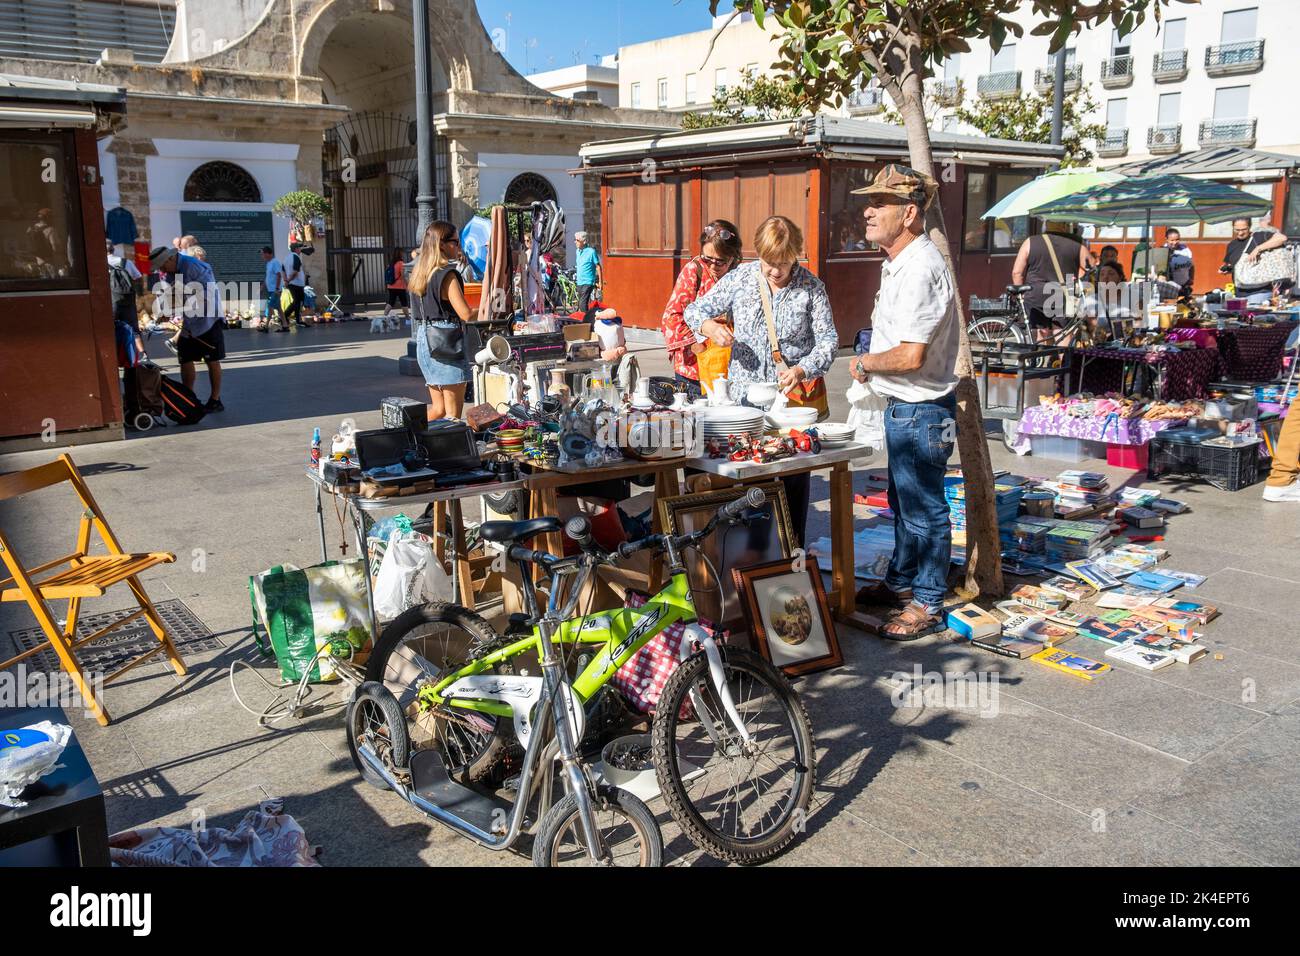 Flea market in the streets located in the old town part of Cadiz, Spain. Vendors selling secondhand antiques & collectables to curious tourists. Stock Photo